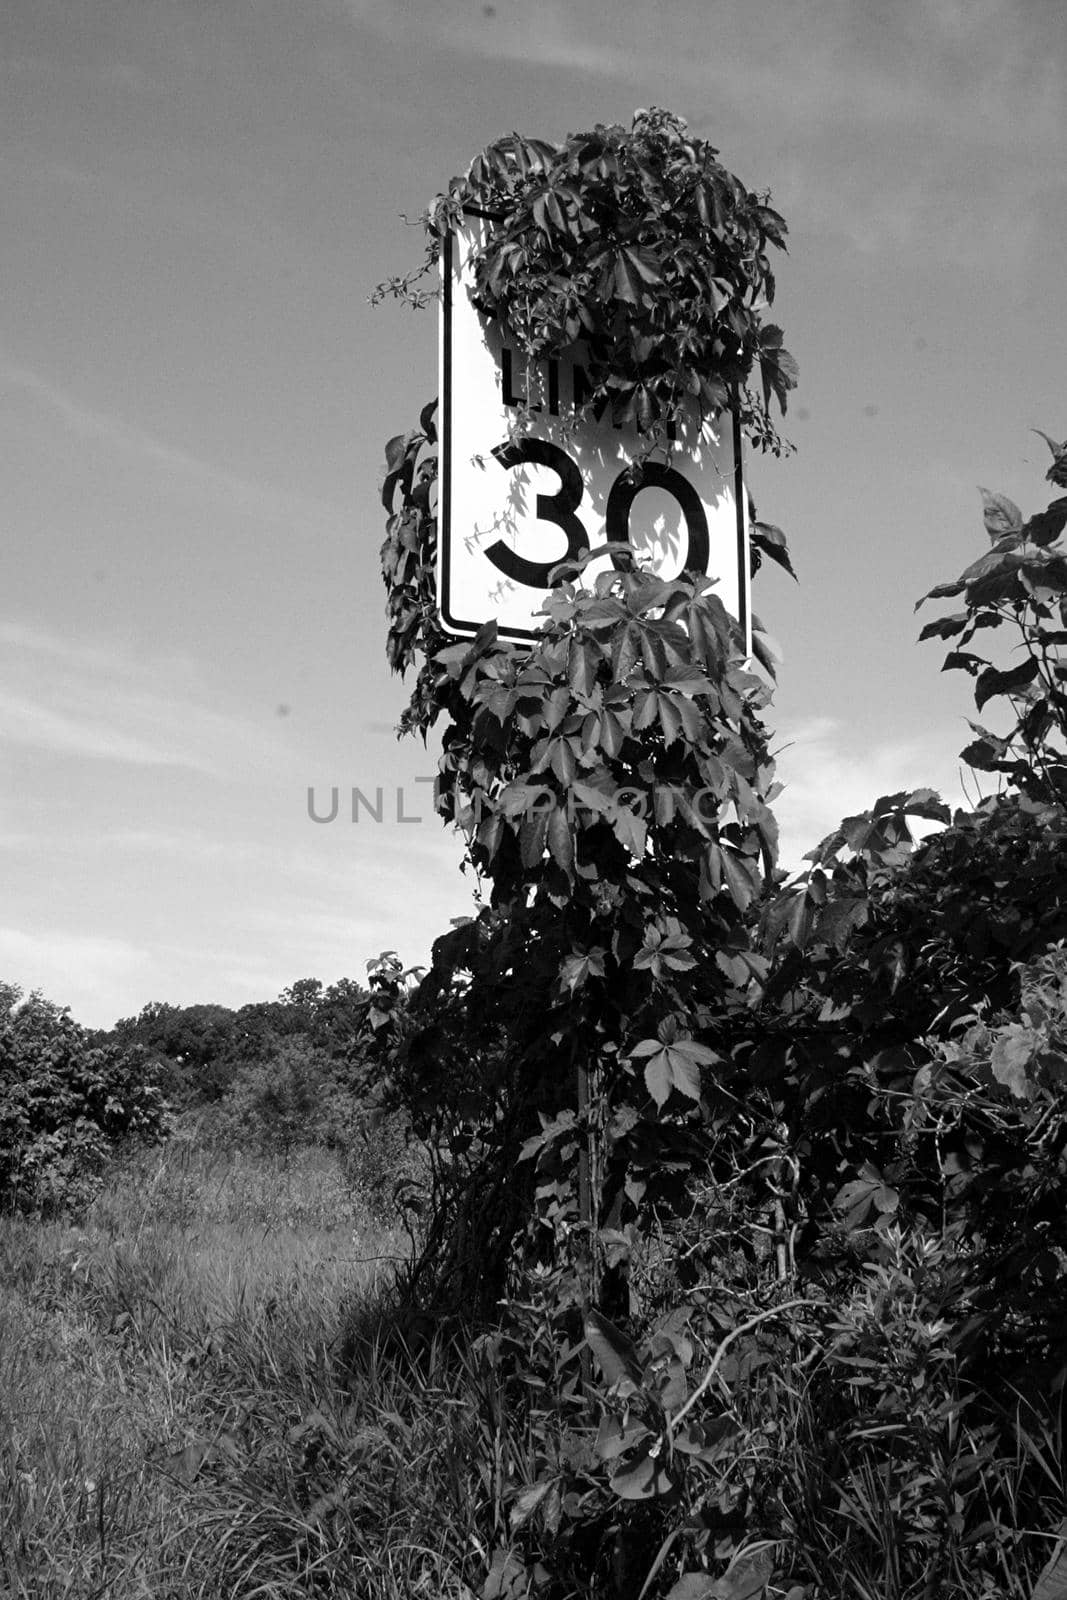 Image of Vines and bushes grow and cover a 30 mile per hour sign on an abandoned road